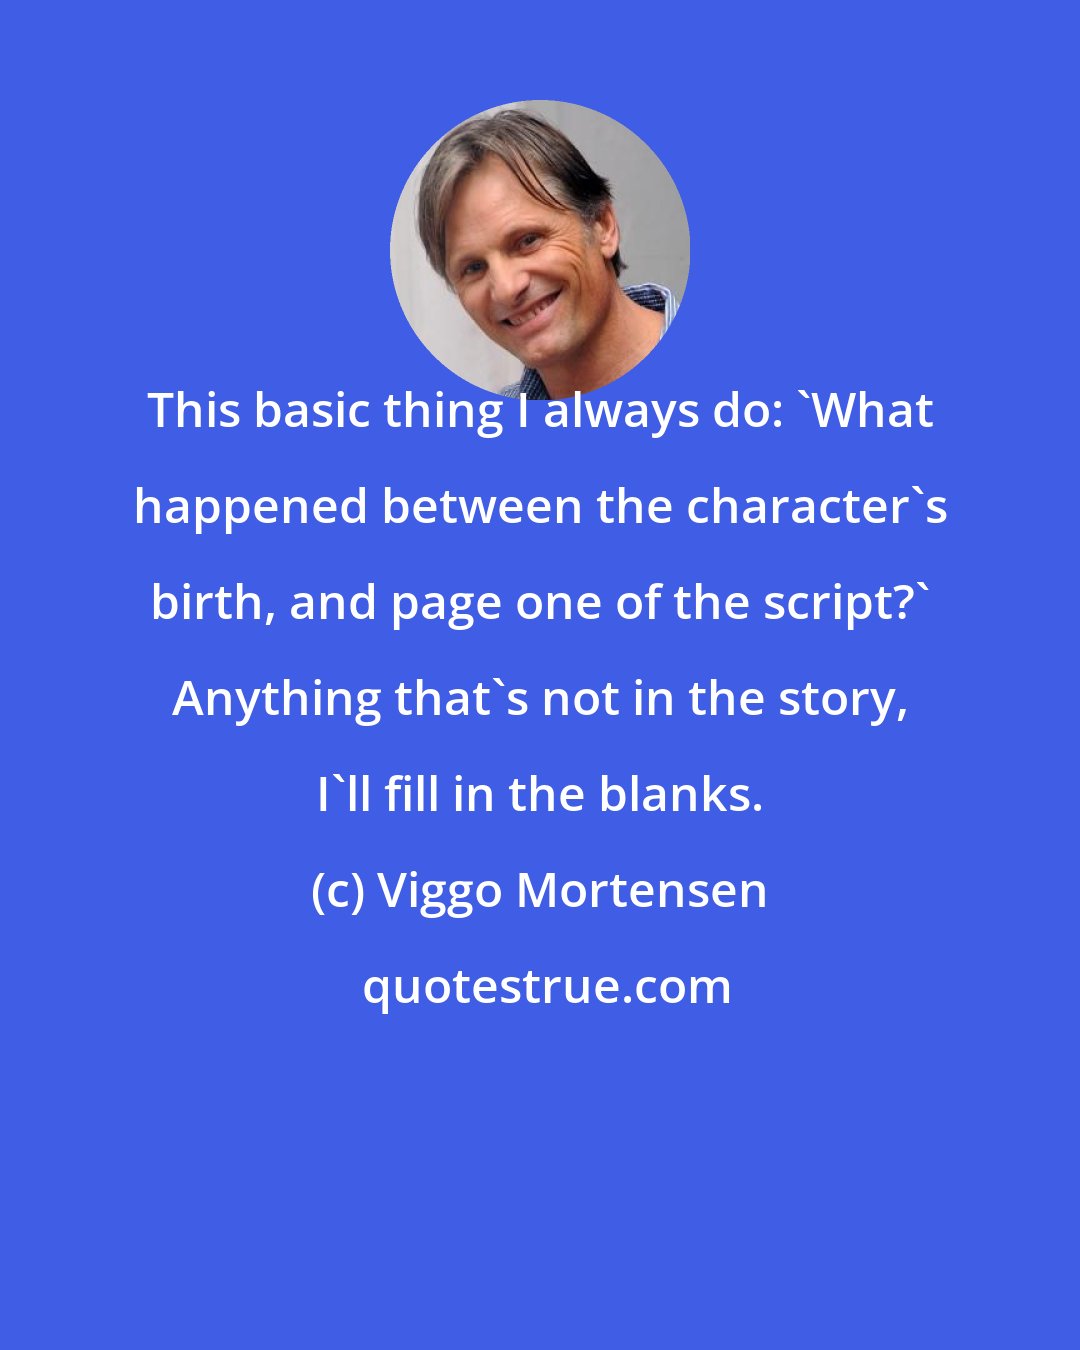 Viggo Mortensen: This basic thing I always do: 'What happened between the character's birth, and page one of the script?' Anything that's not in the story, I'll fill in the blanks.